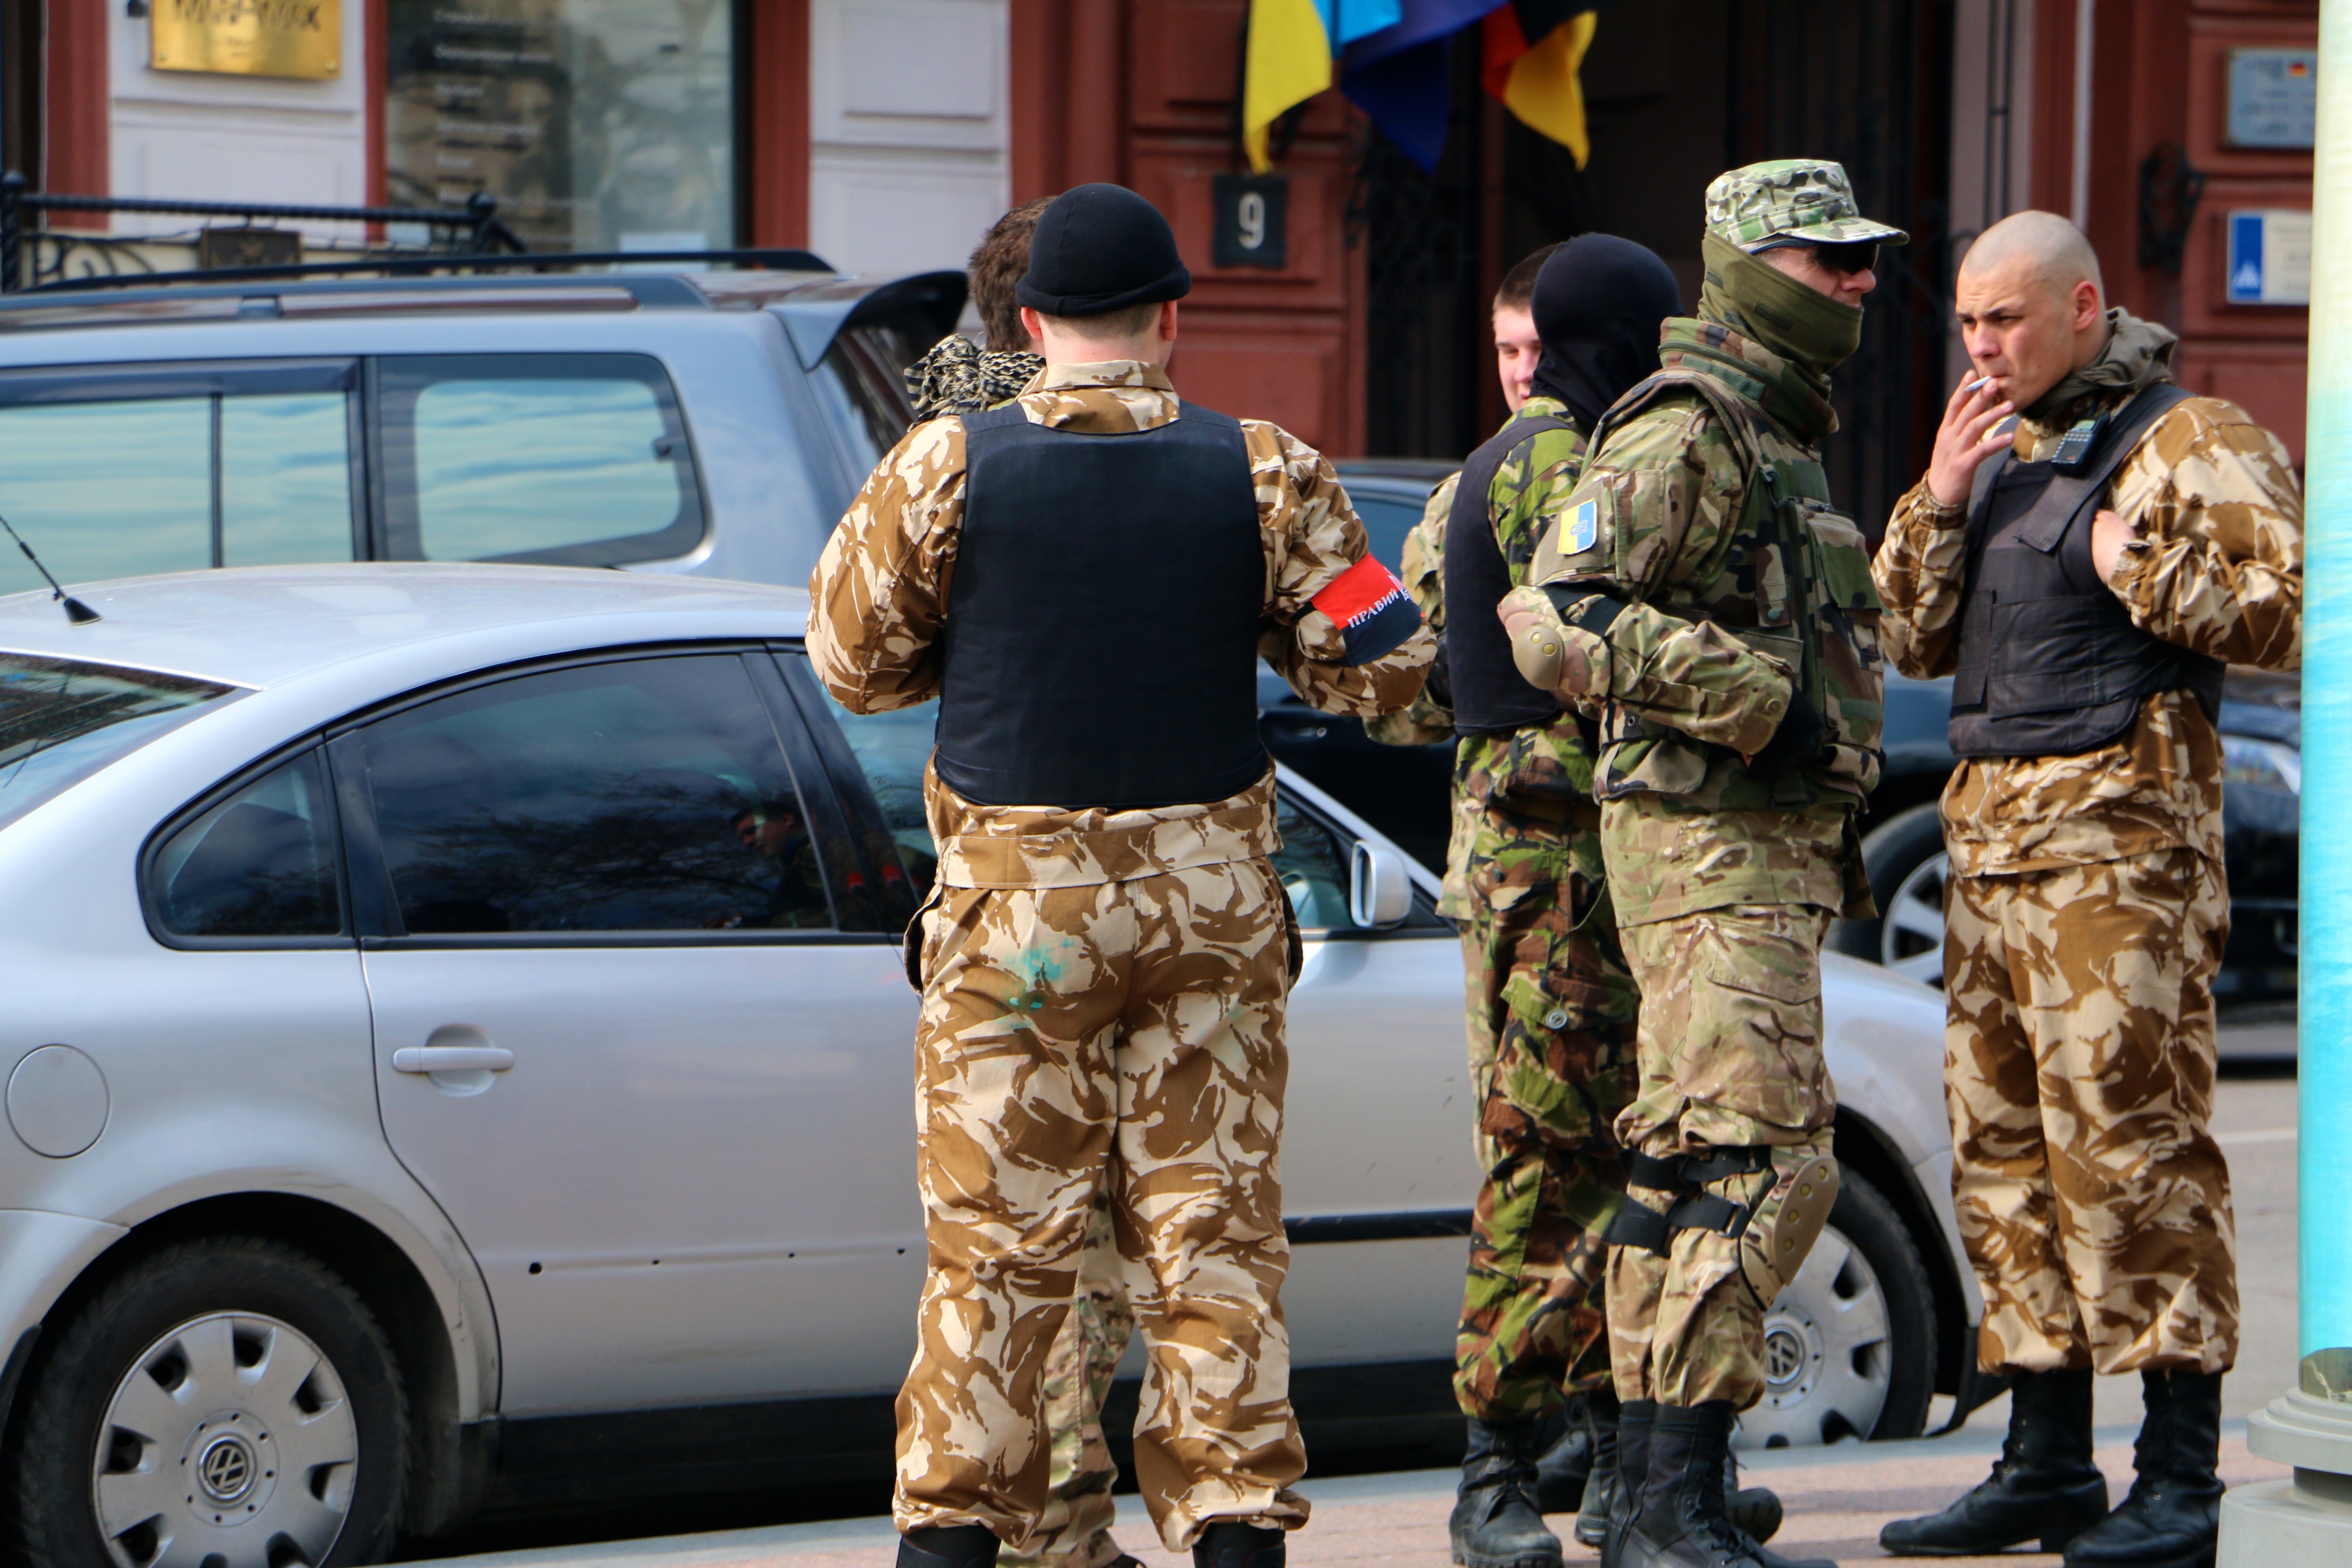 Volunteer battalion soldiers in central Odessa on April 16. (Photo: Nolan Peterson/The Daily Signal)